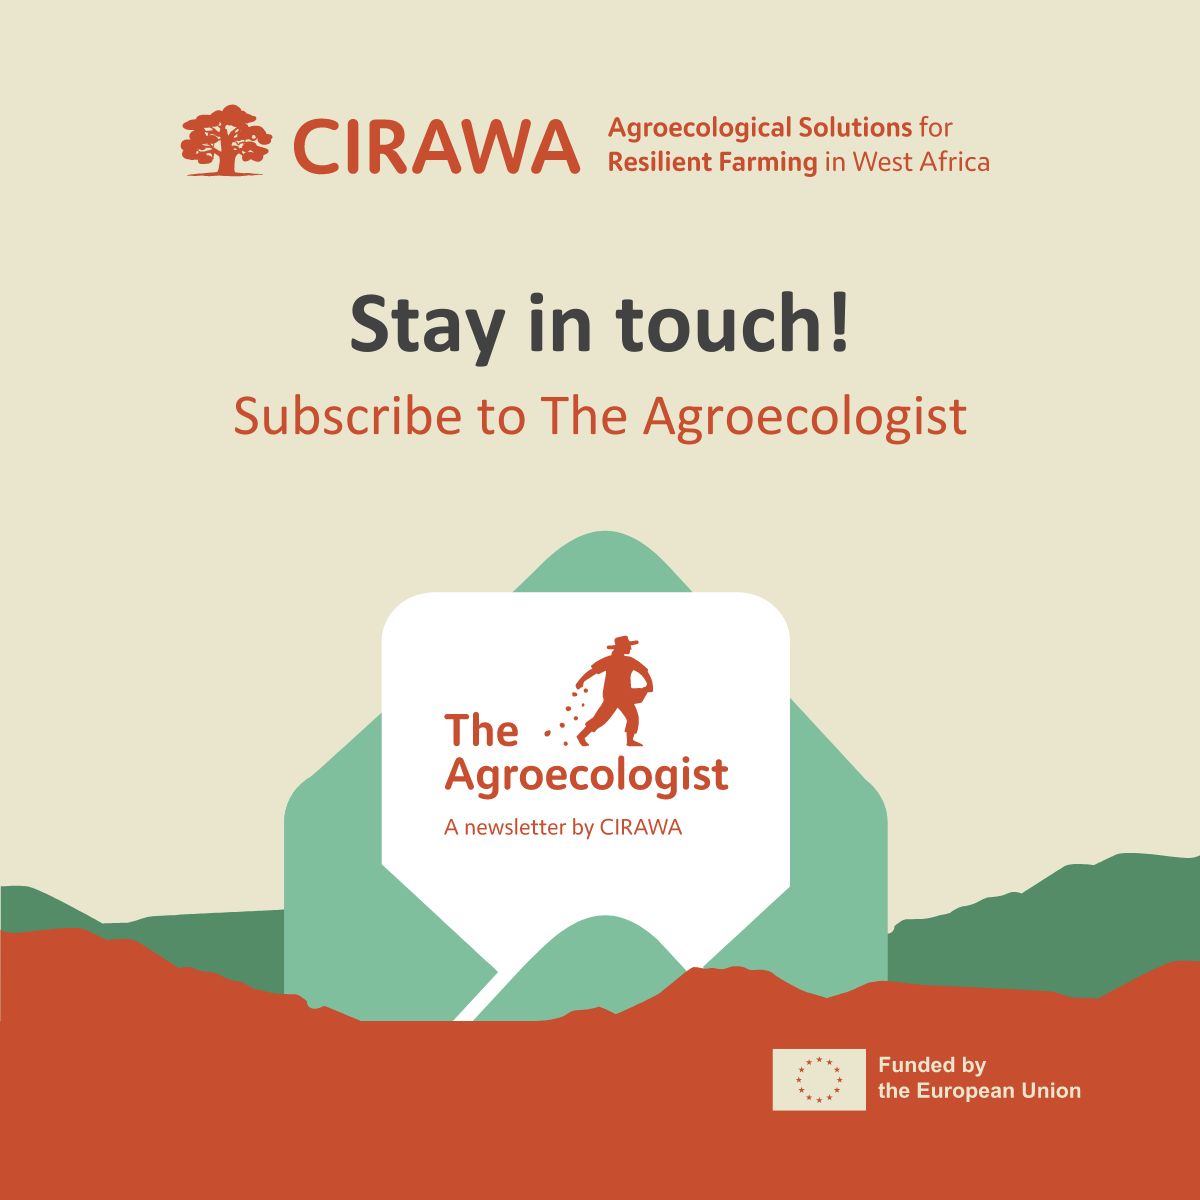 ✉️1 more week until our next newsletter, make sure you don't miss it!

👩‍🌾Are you interested in enhancing ecosystem health & biodiversity while improving local livelihoods through agroecology?🌱

Click the link and subscribe to 'The Agronomist' here⬇️
cirawa.eu/newsletter/